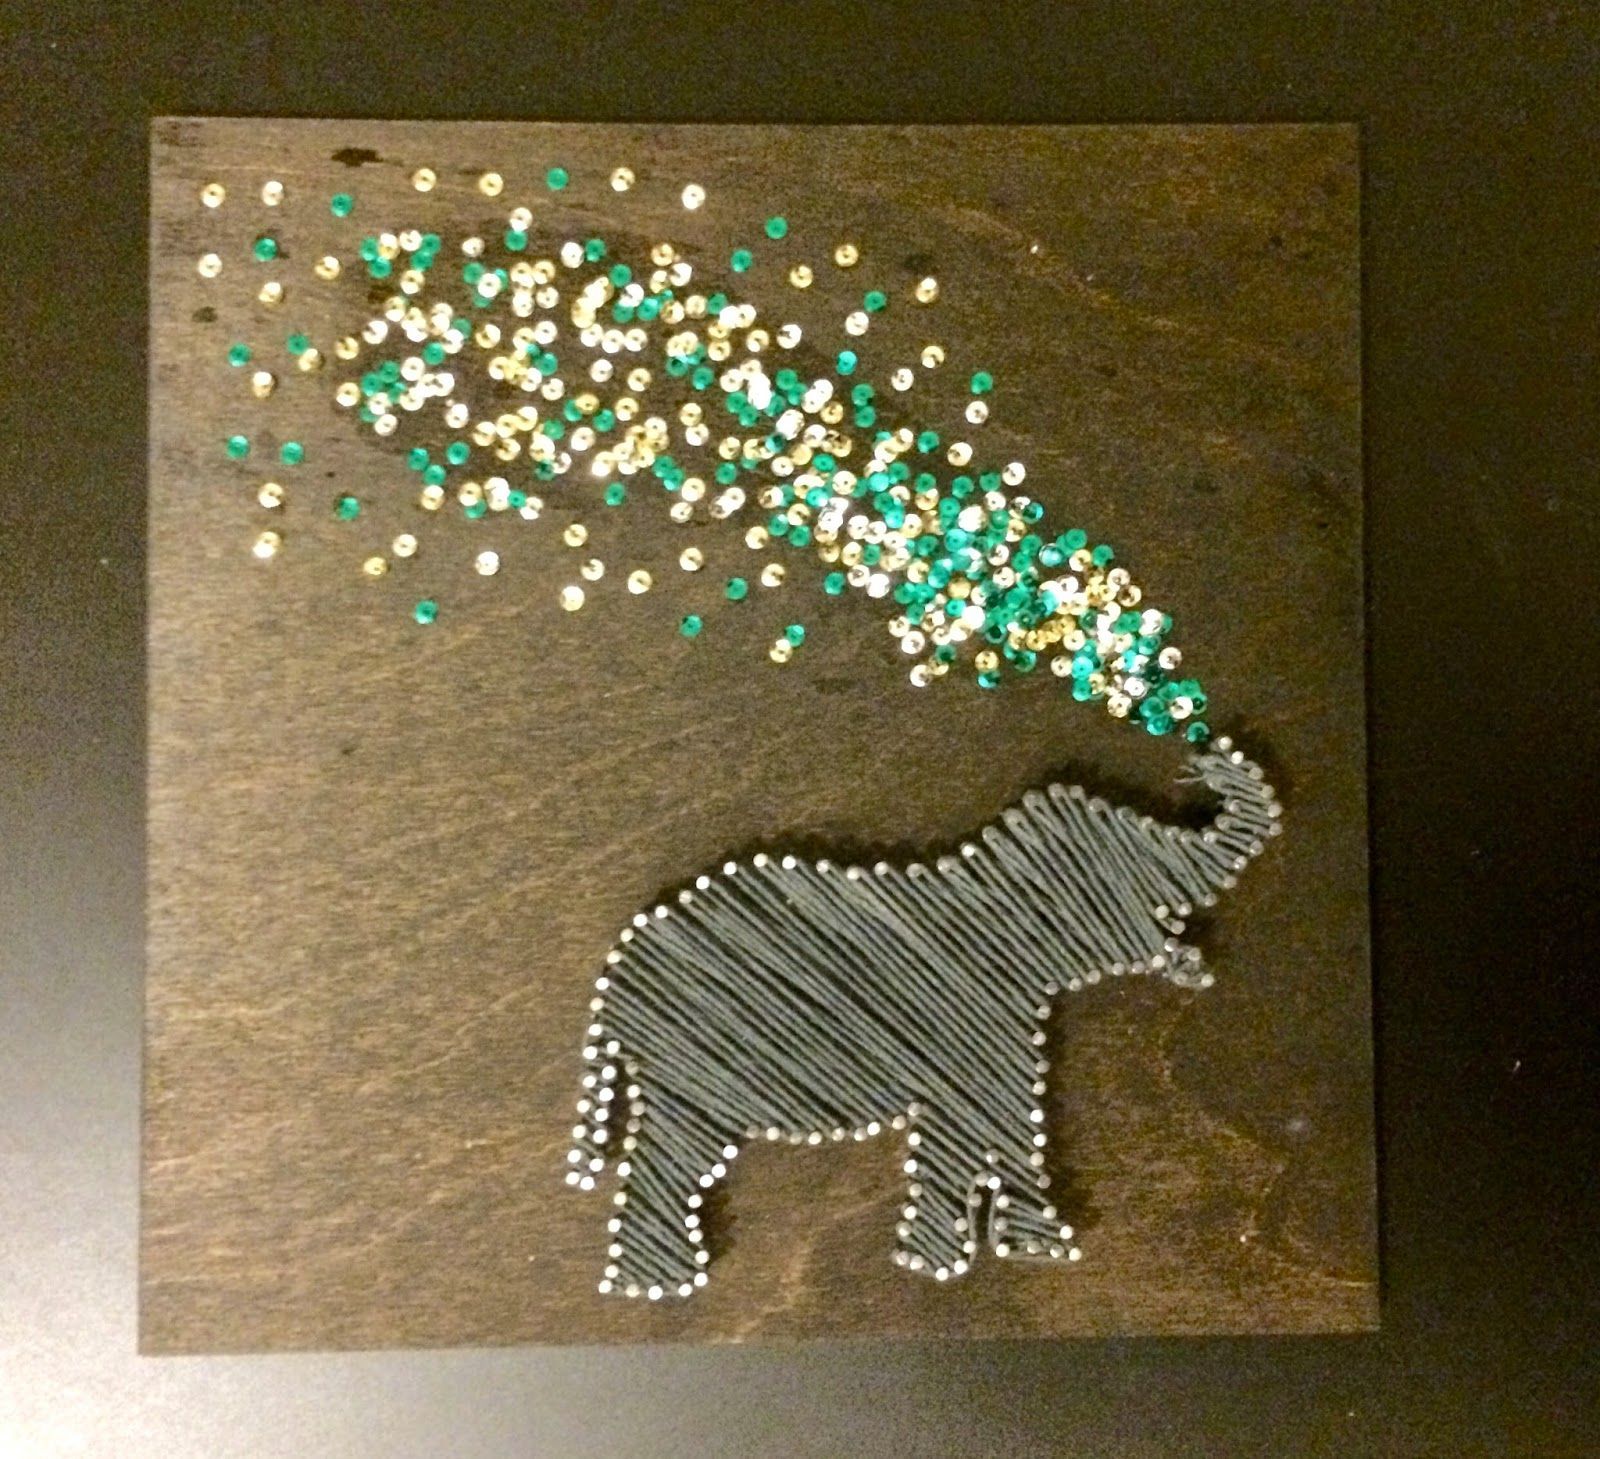 Tackling the string art elephant. The first installment in my blog!